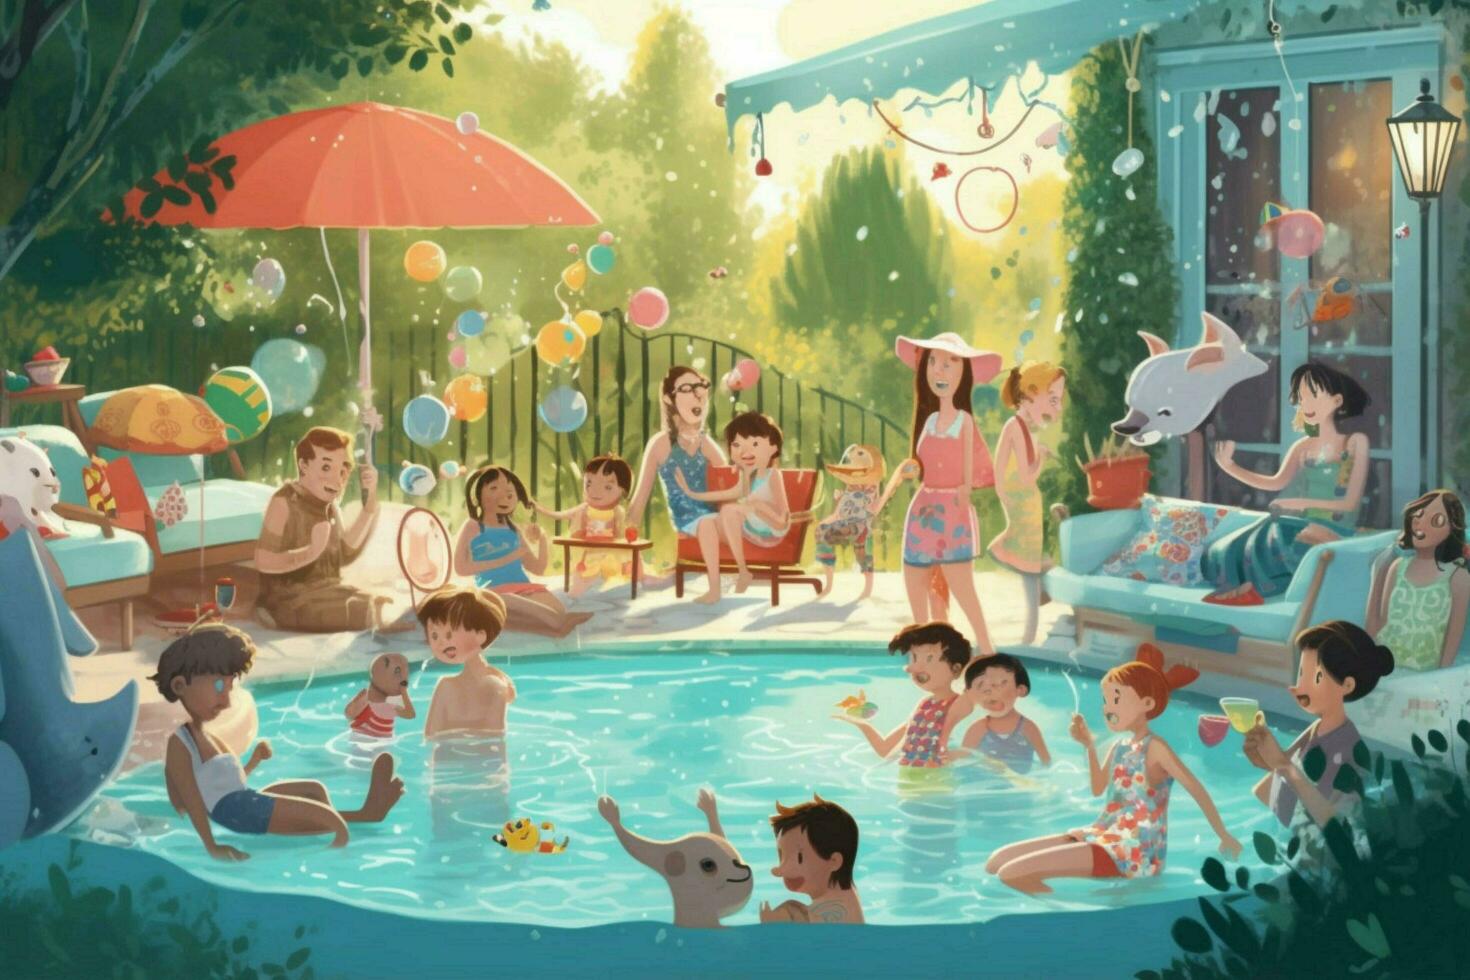 A group of children having a pool party photo